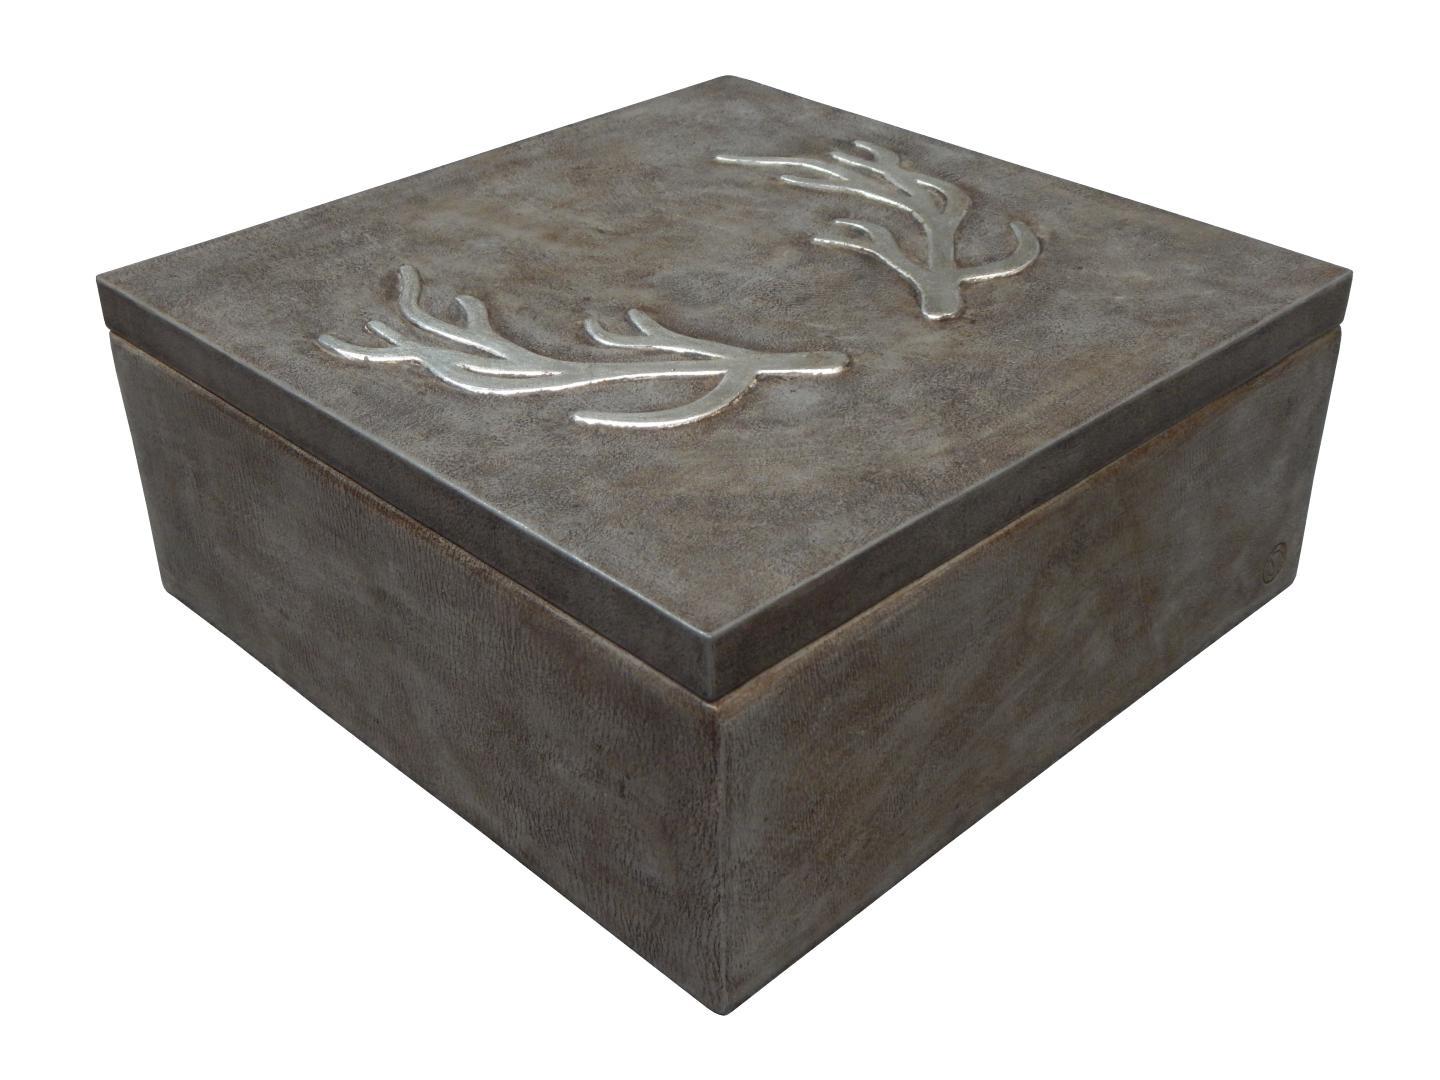 leather box with an antler deer horns design on high relief on the top